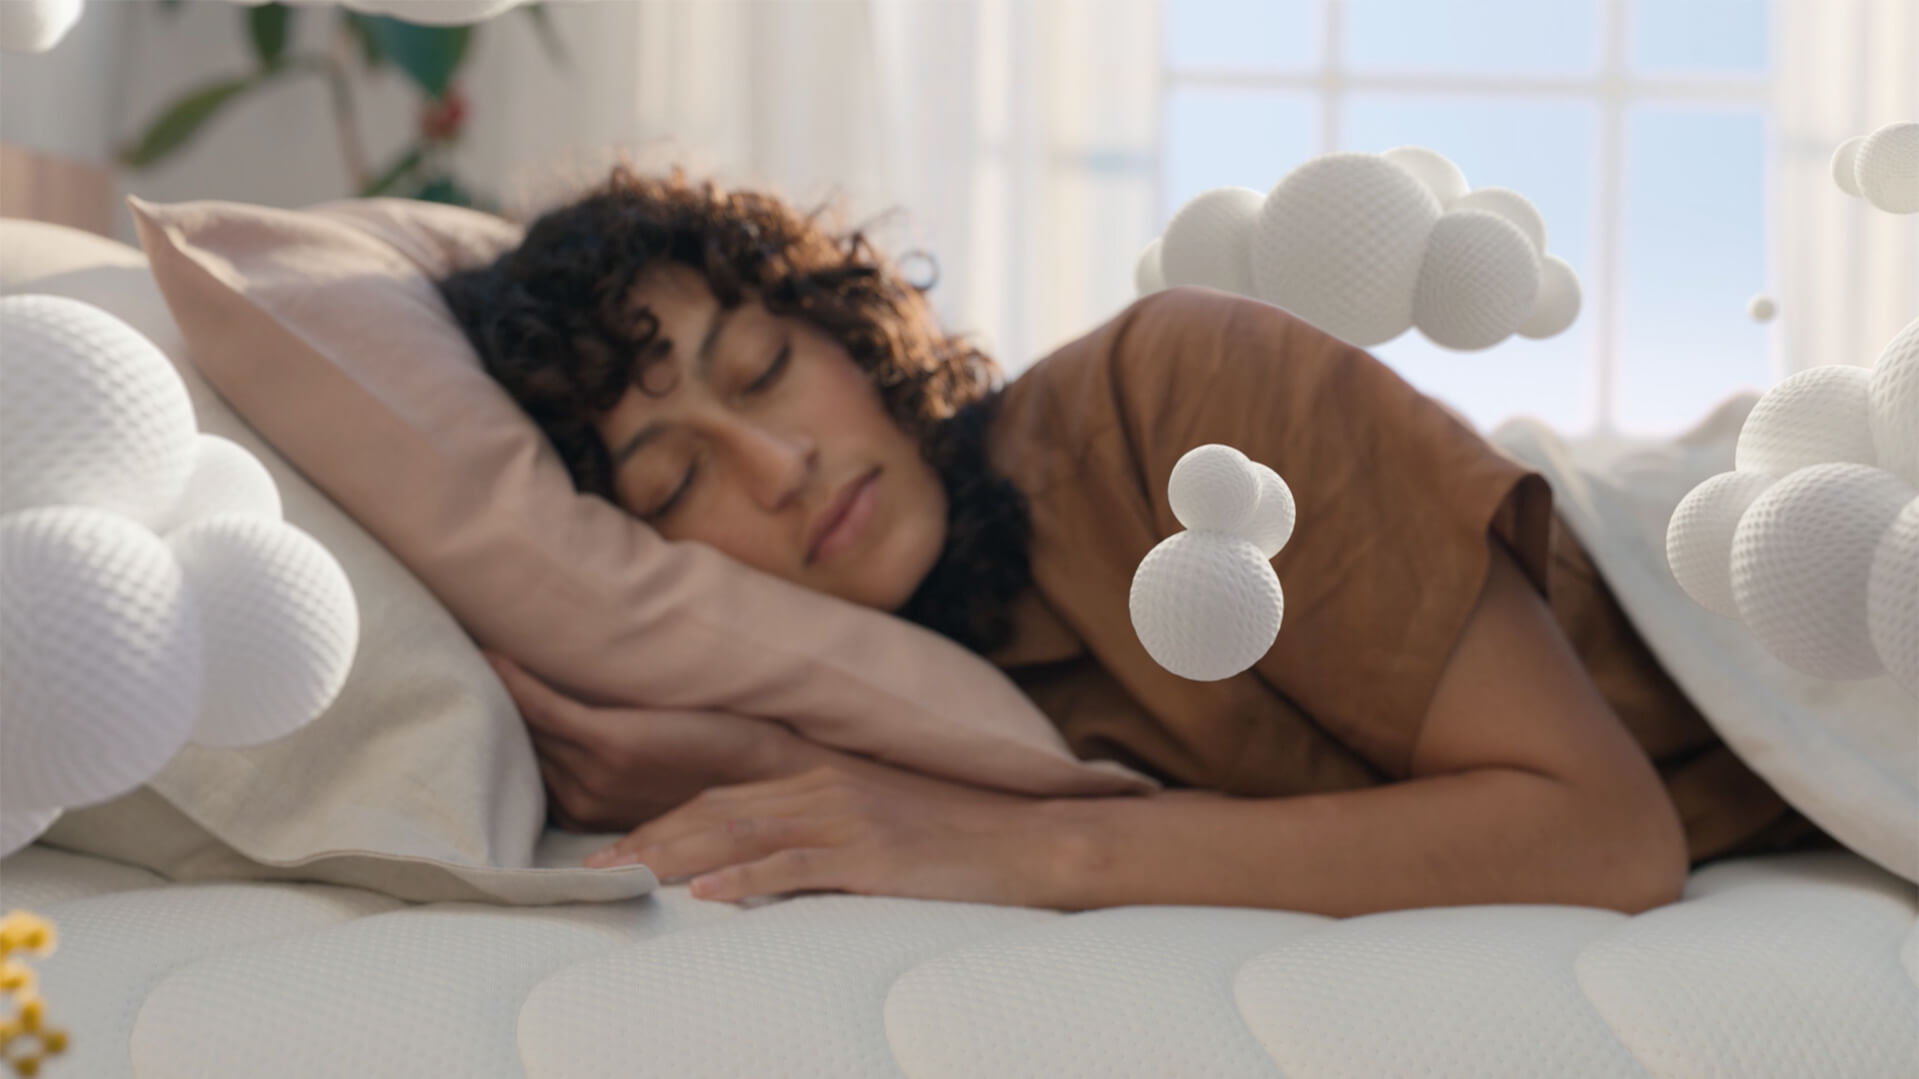 Koala Kloudcel television campaign commercial showing woman laying on bed sleeping peacefully as VFX foam clouds surround her